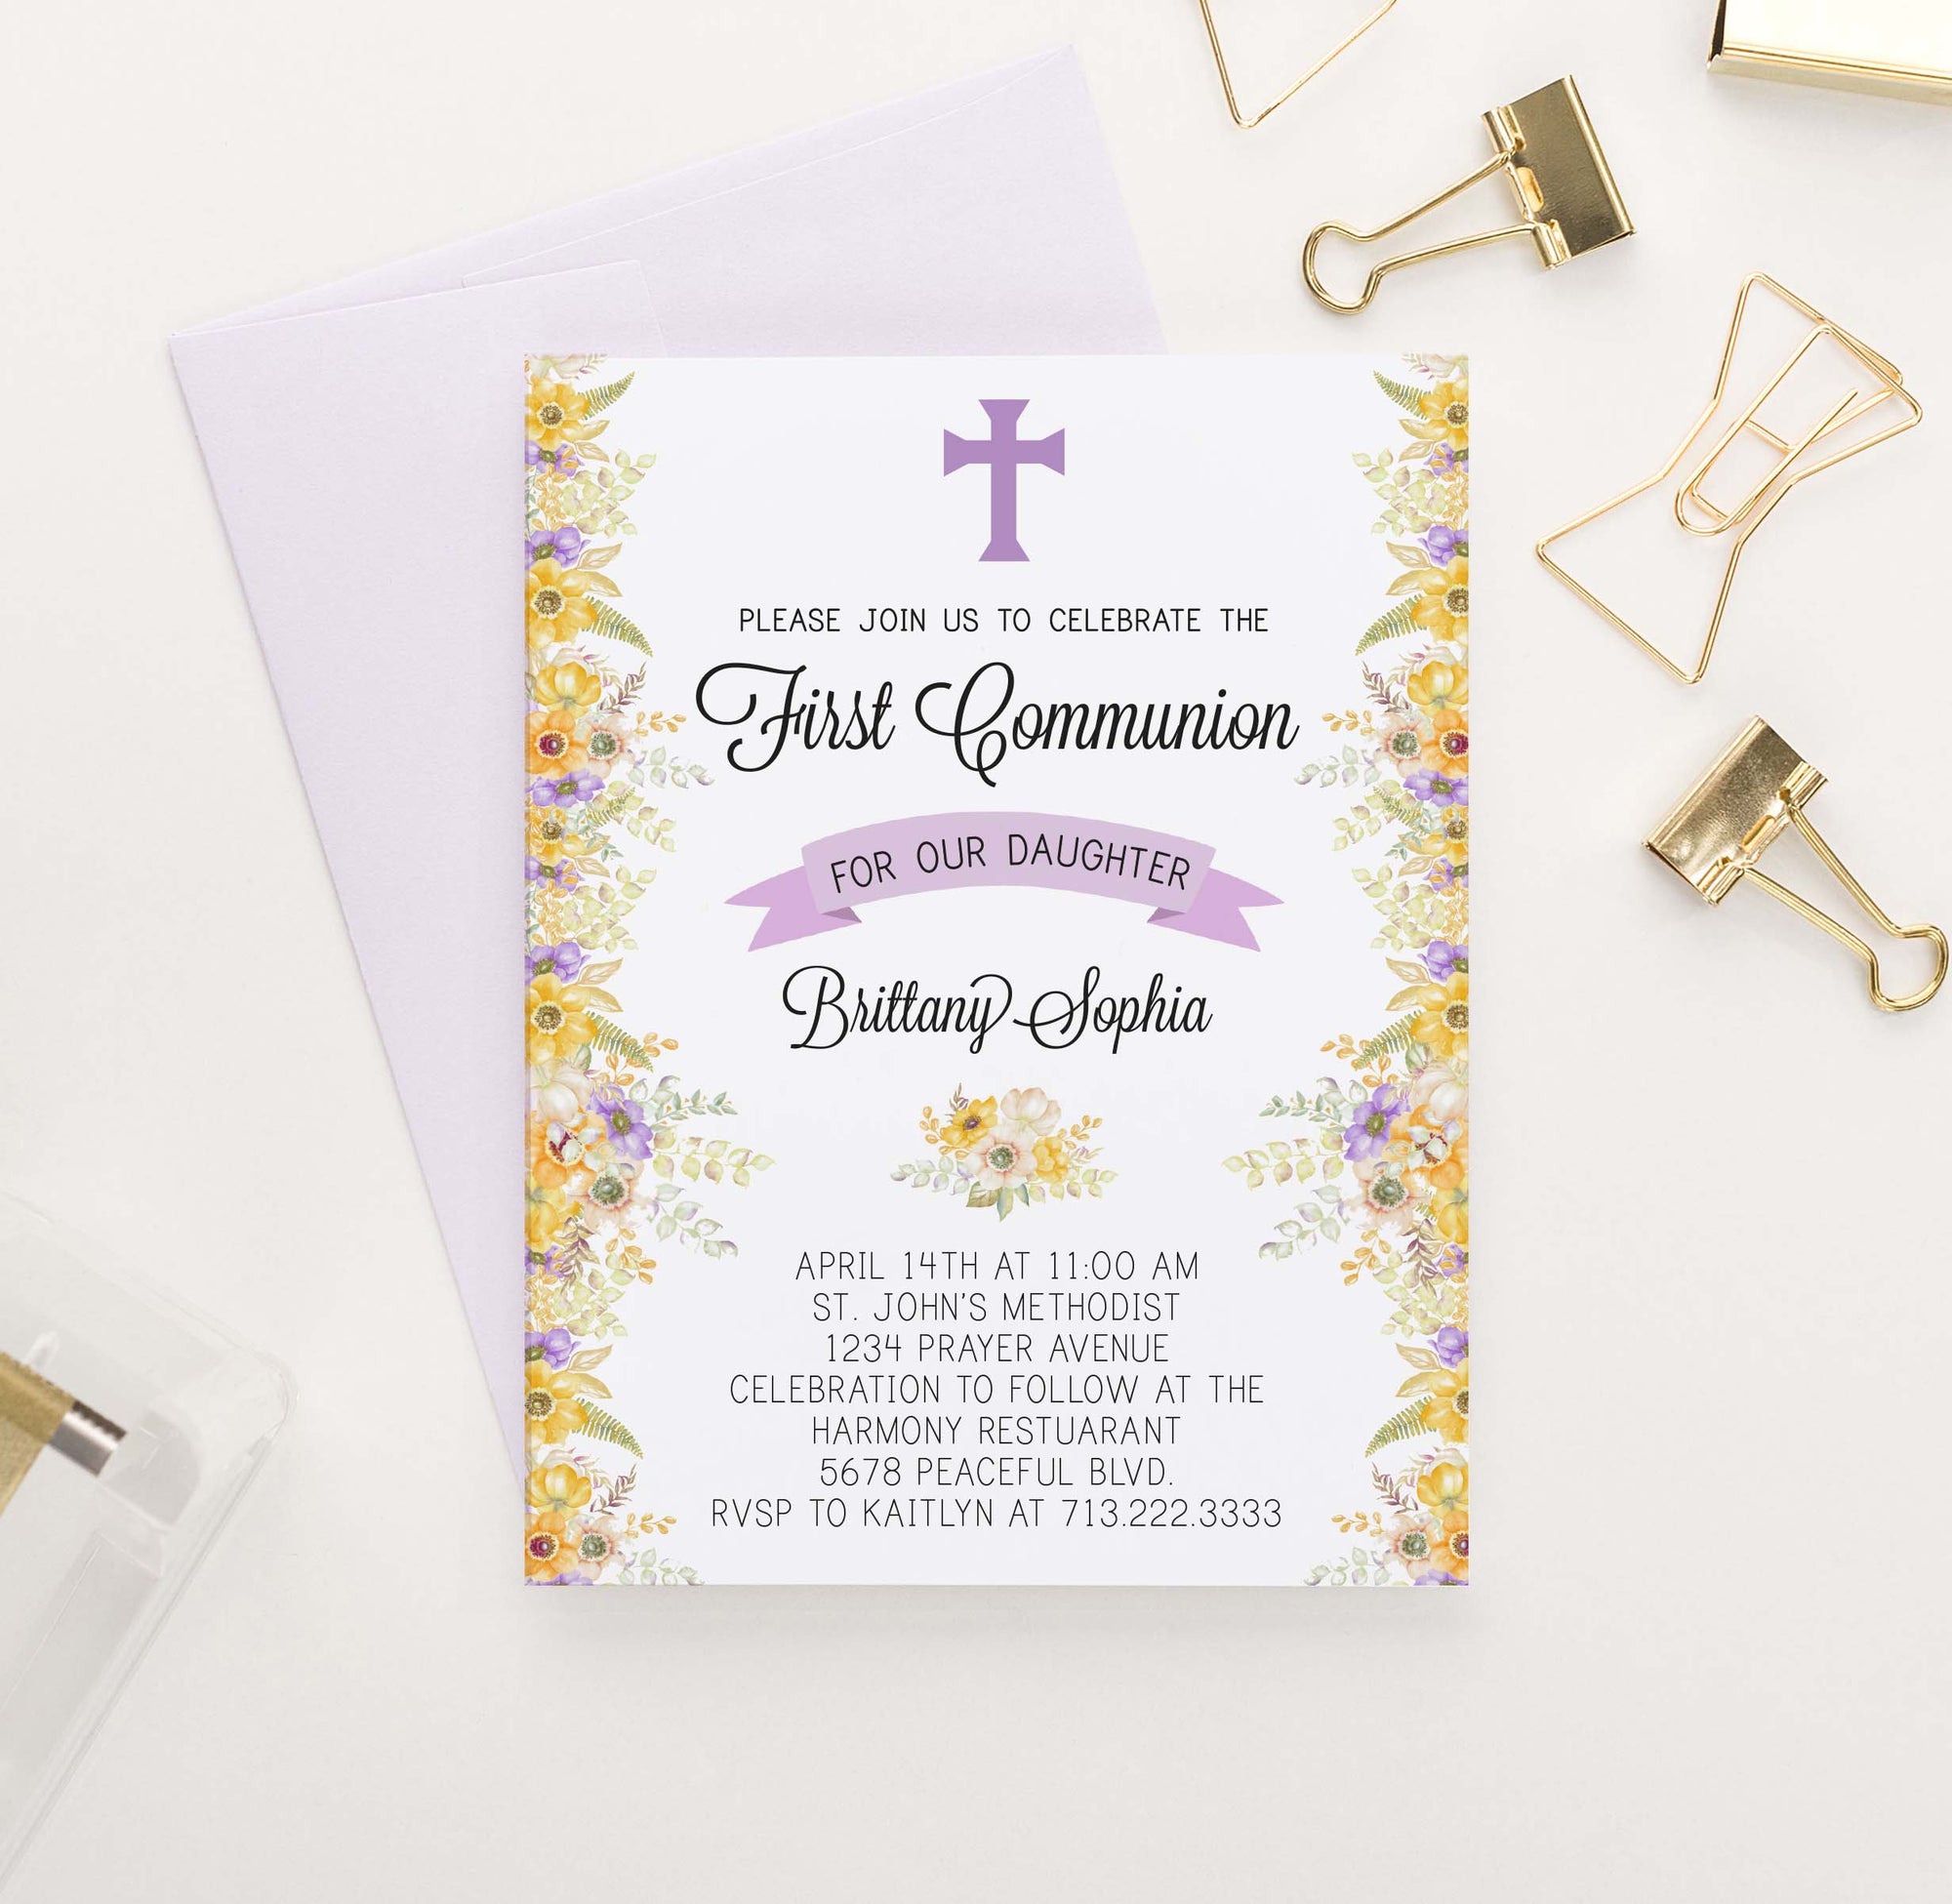 FCI014 personalized first communion invitations with yellow and purple florals flowers elegant 